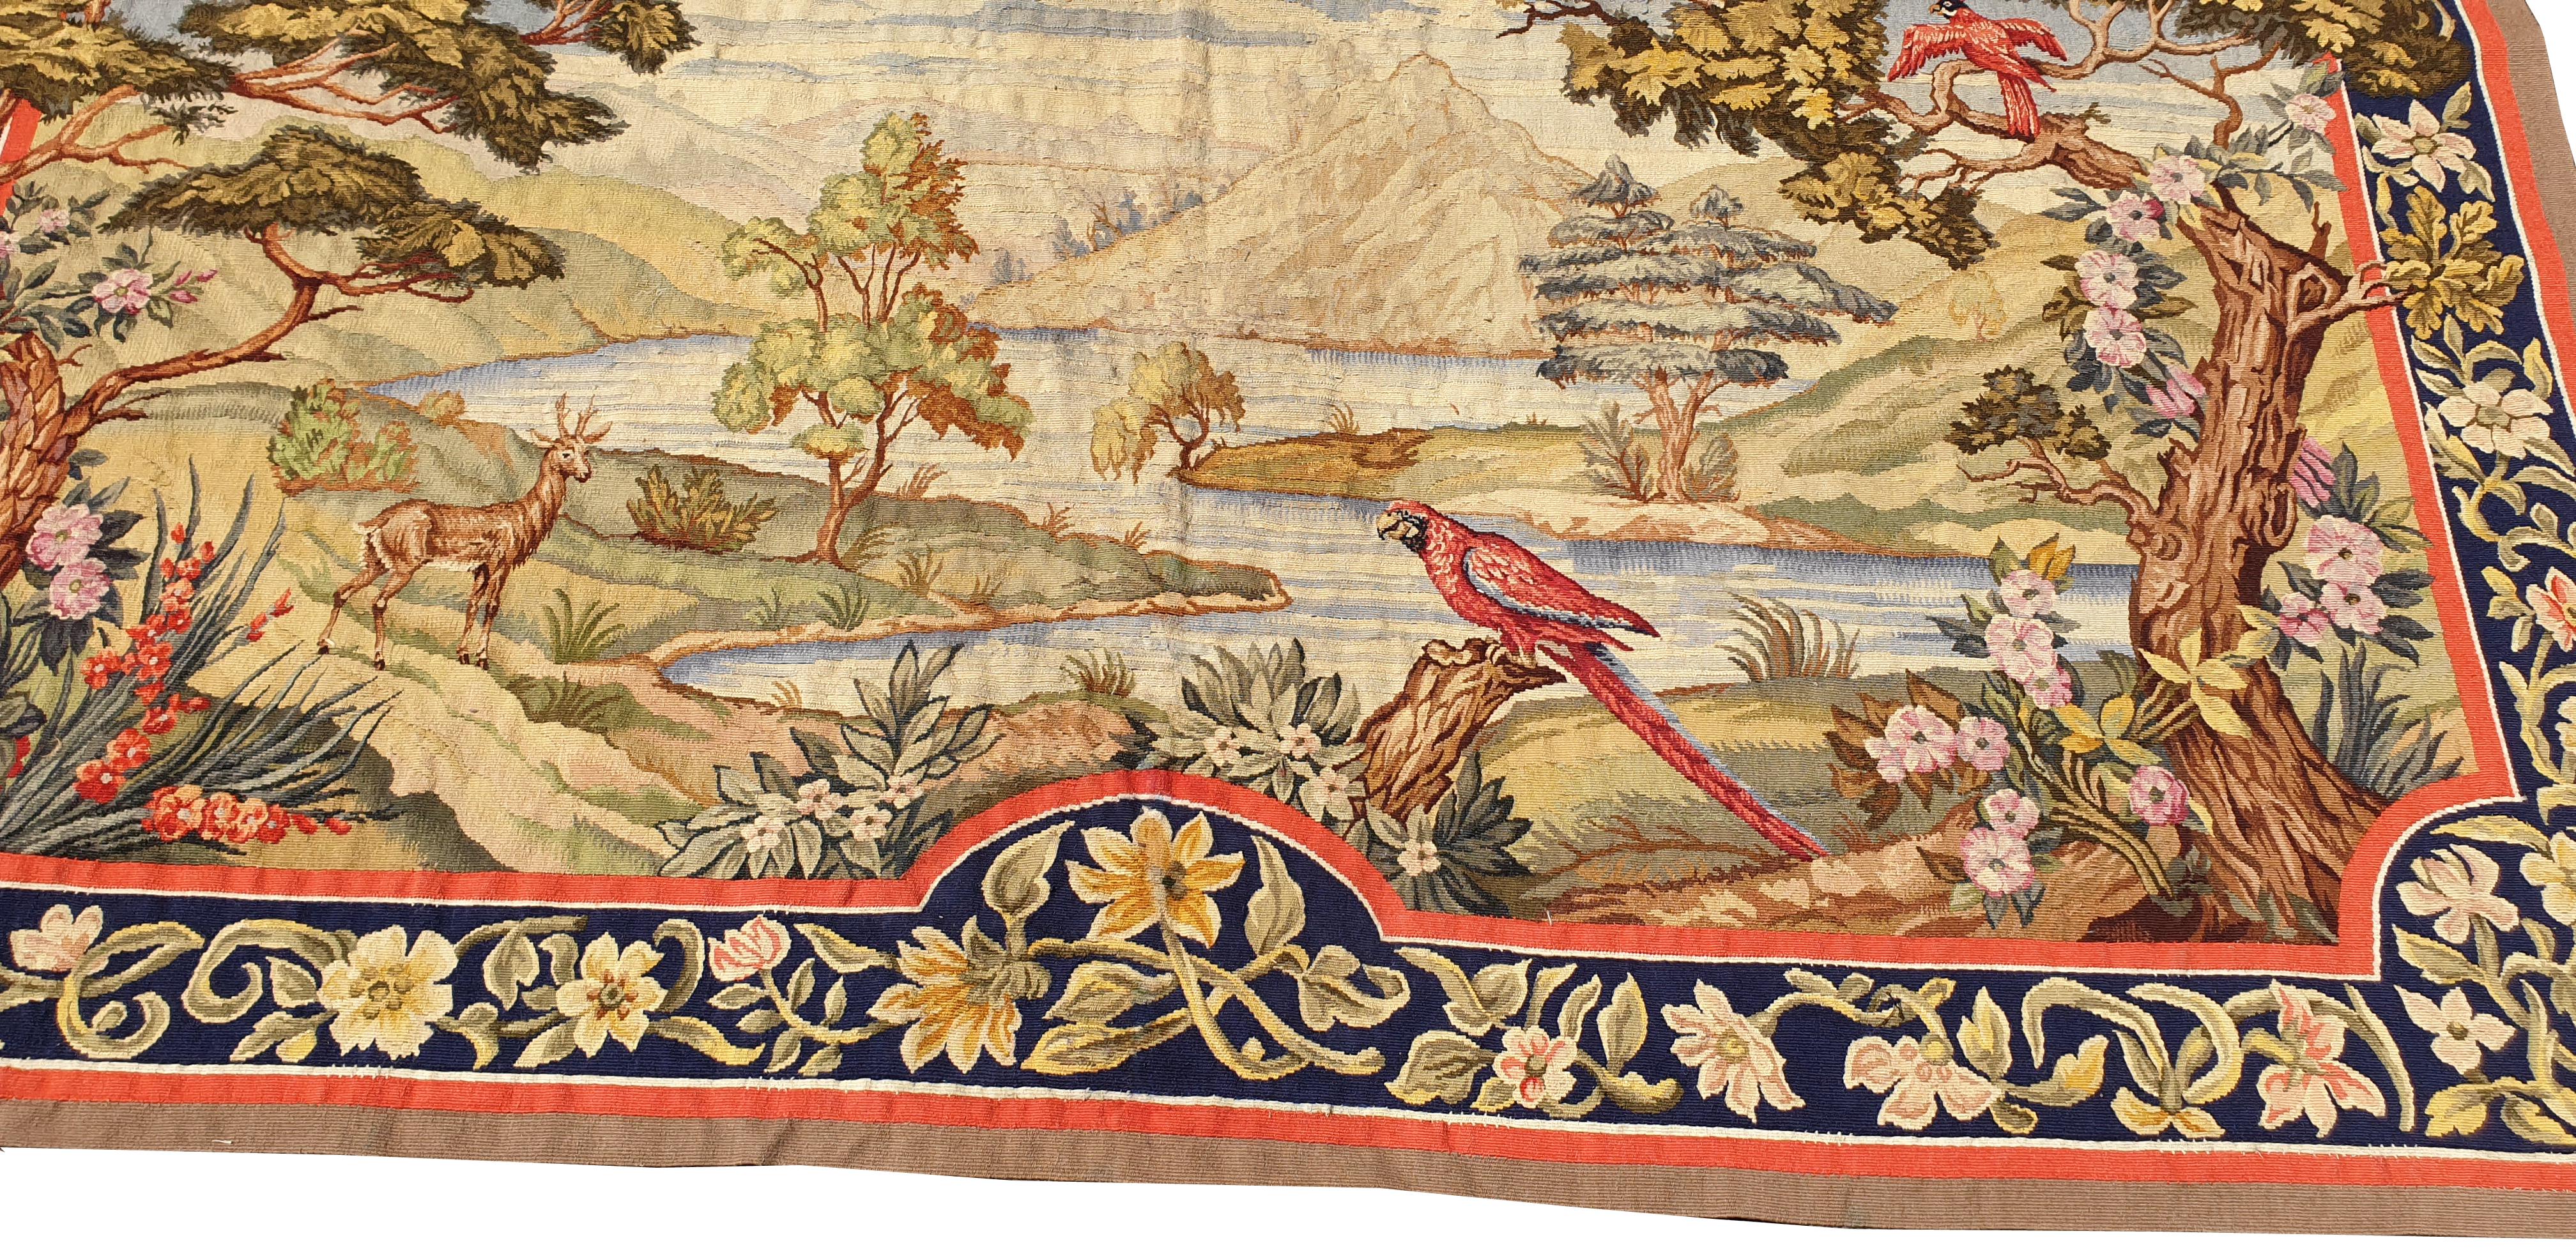 Hand-Woven Aubusson French Antique Tapestry, 19th Century